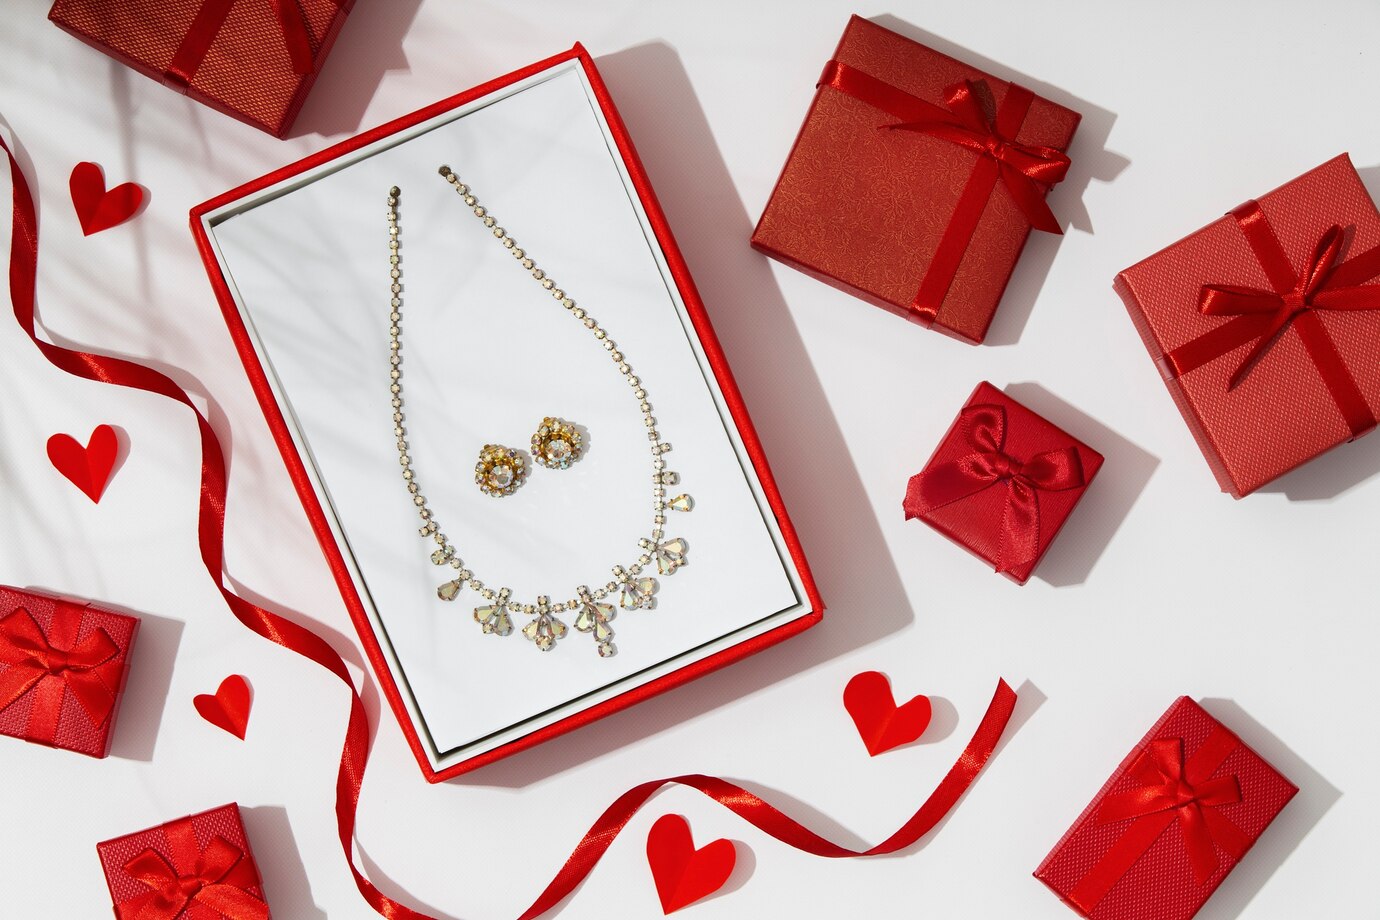 Romantic Sentimental Gifts For Him for Valentine's Day